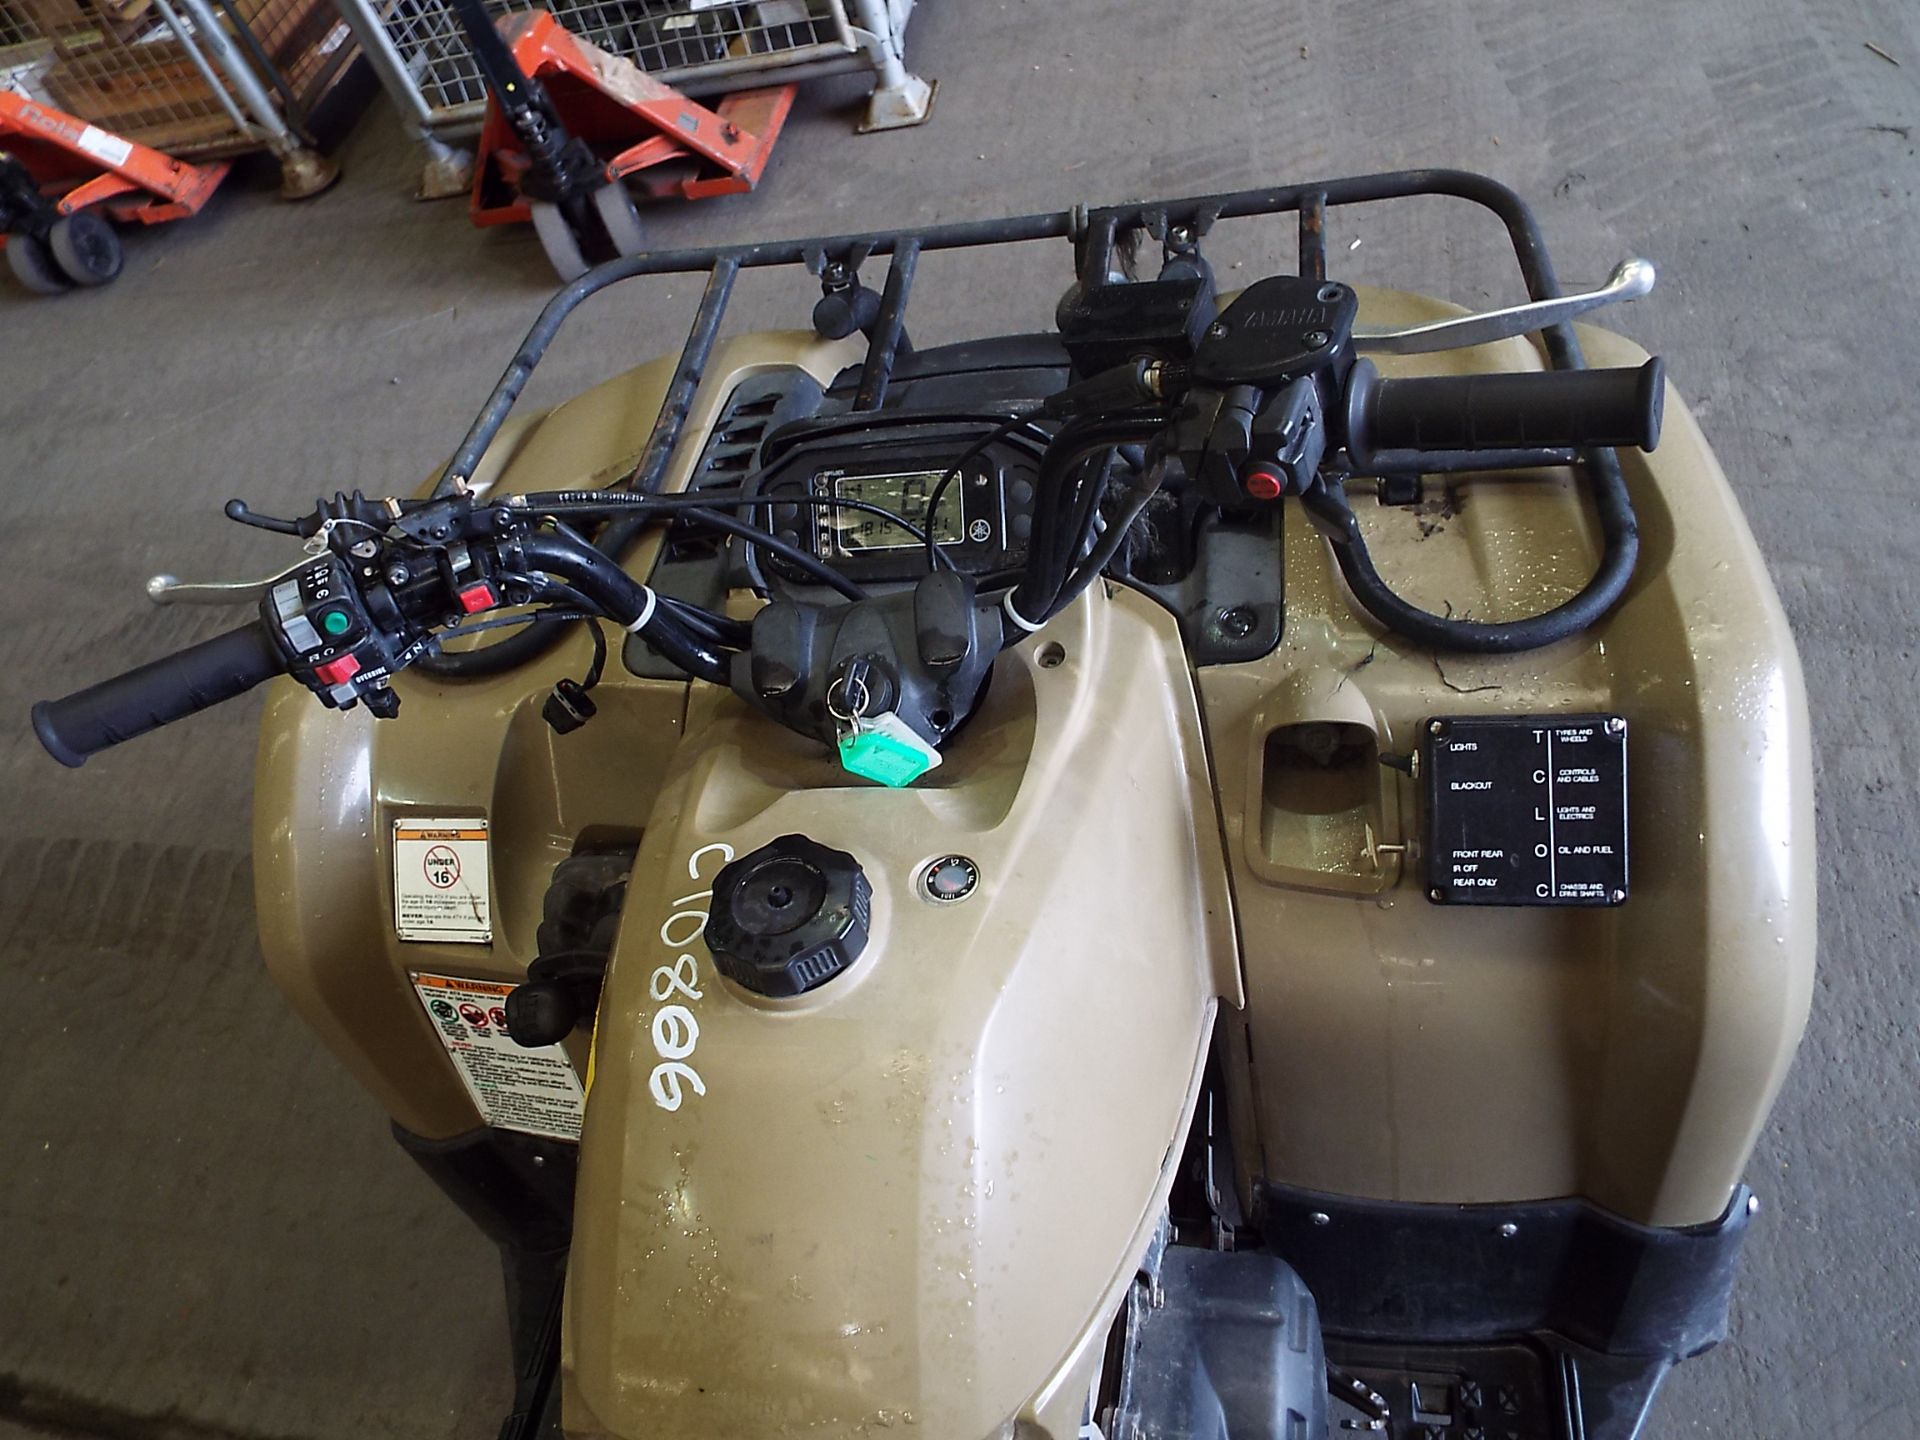 Military Specification Yamaha Grizzly 450 4 x 4 ATV Quad Bike Complete with Winch - Image 10 of 18